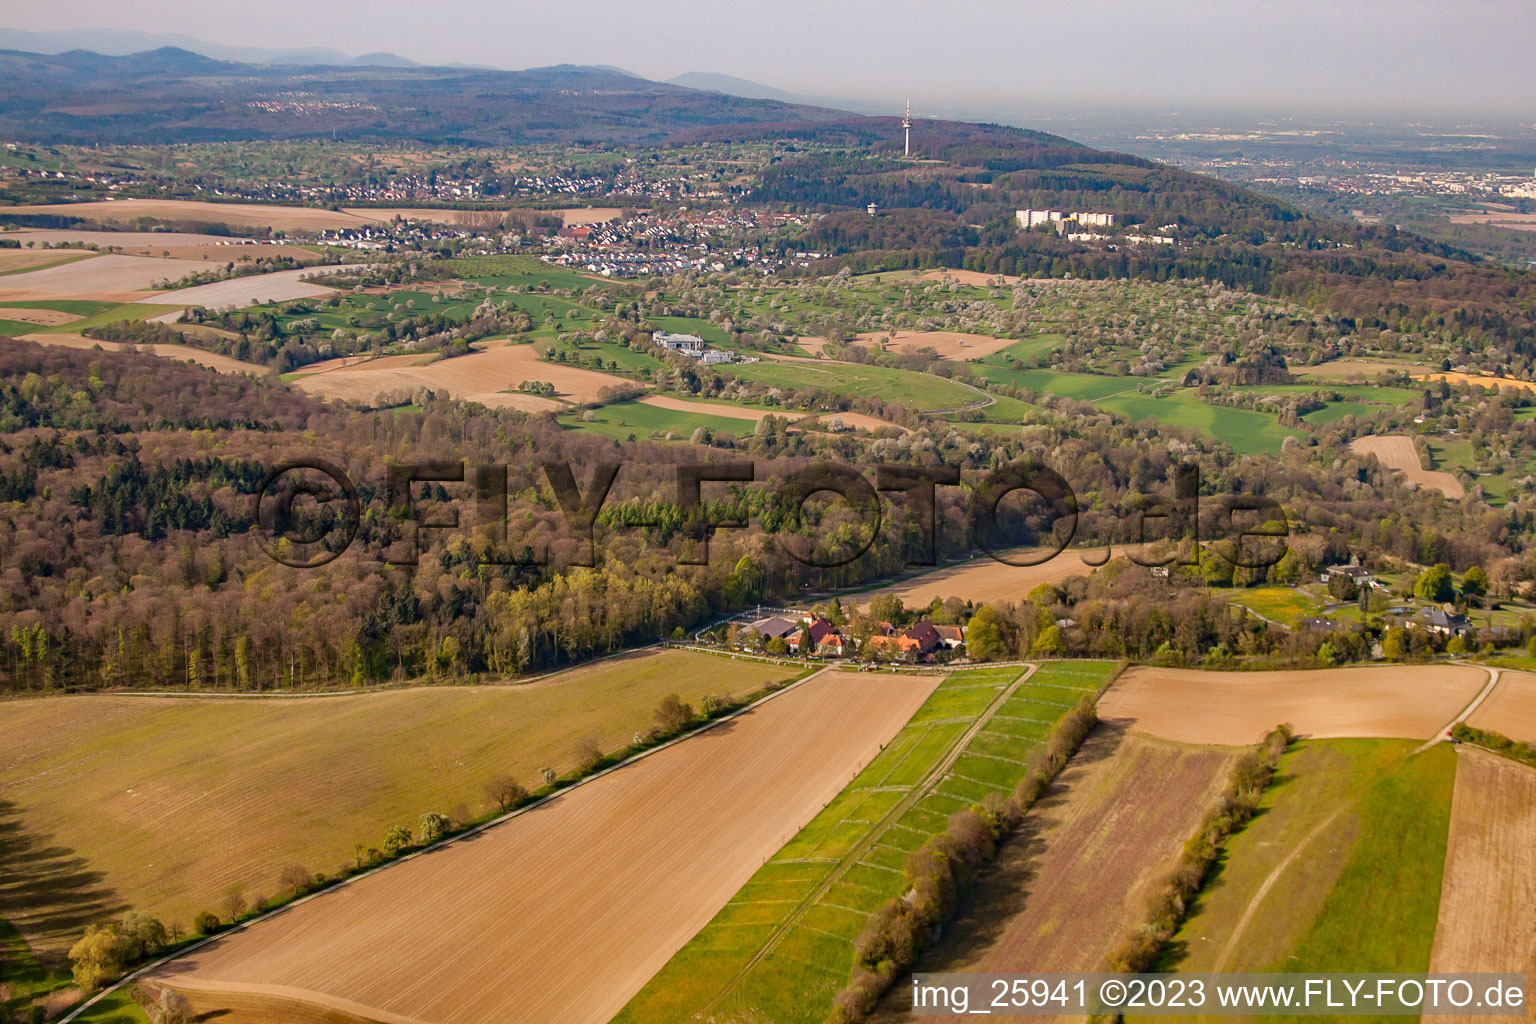 Drone image of Rittnerthof in the district Durlach in Karlsruhe in the state Baden-Wuerttemberg, Germany